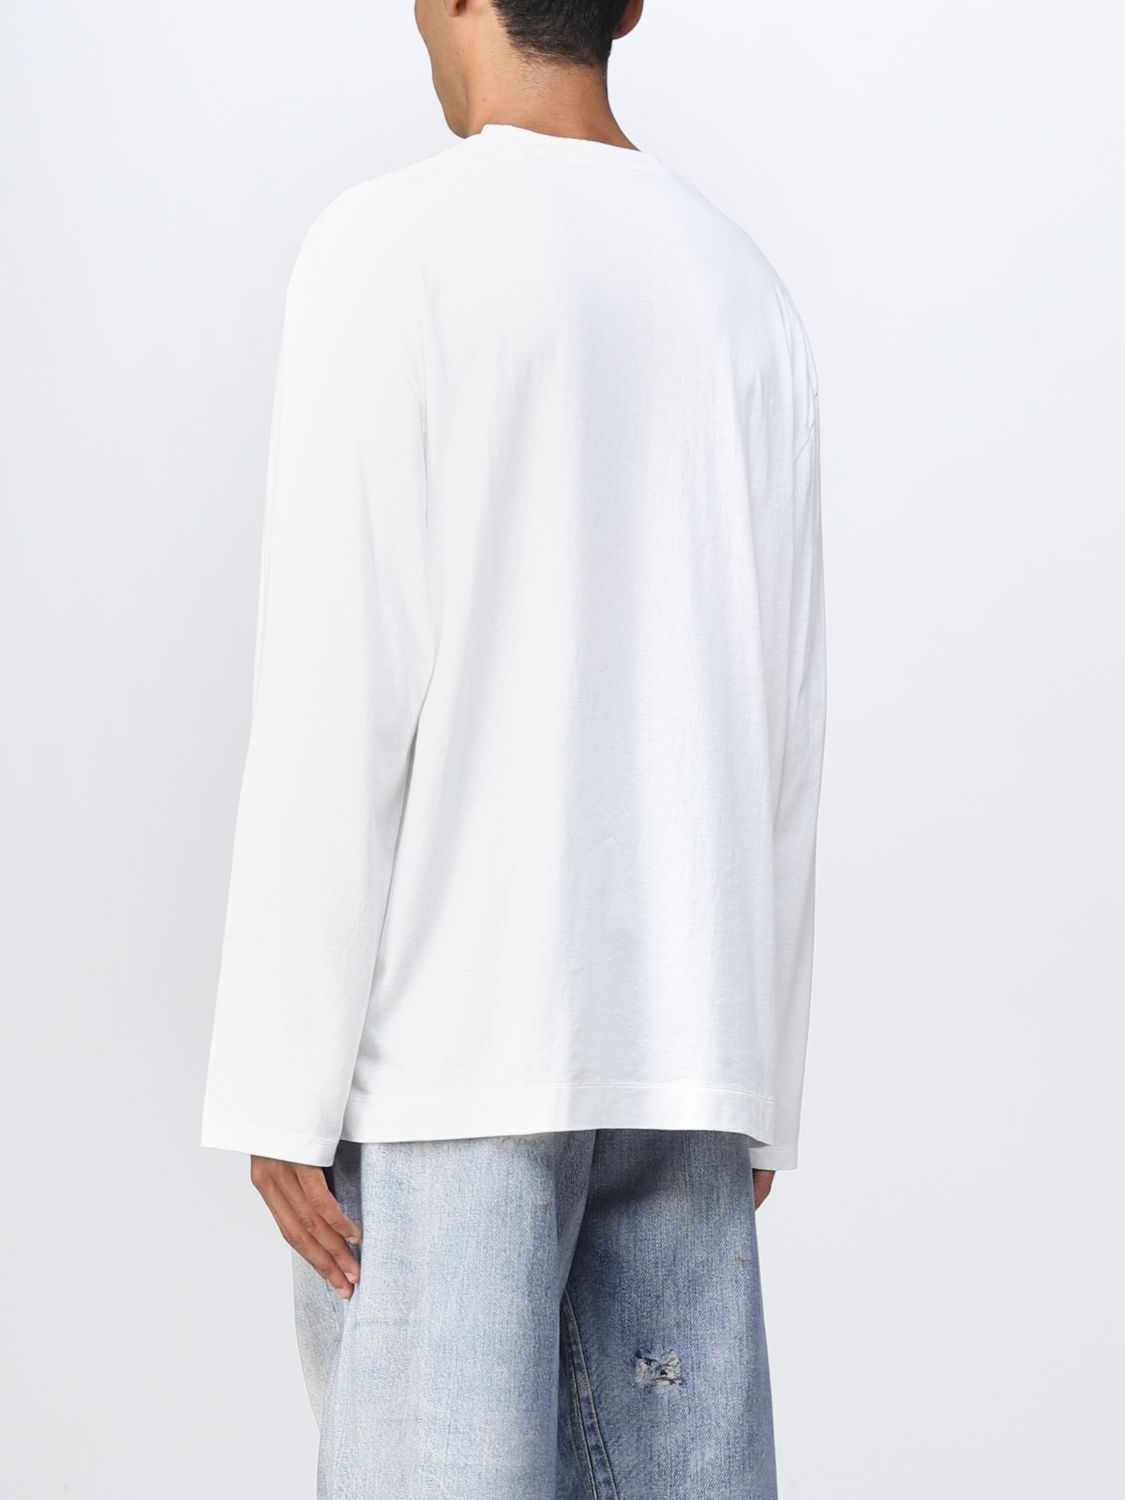 T-shirt Our Legacy: T-shirt Our Legacy homme blanc 3